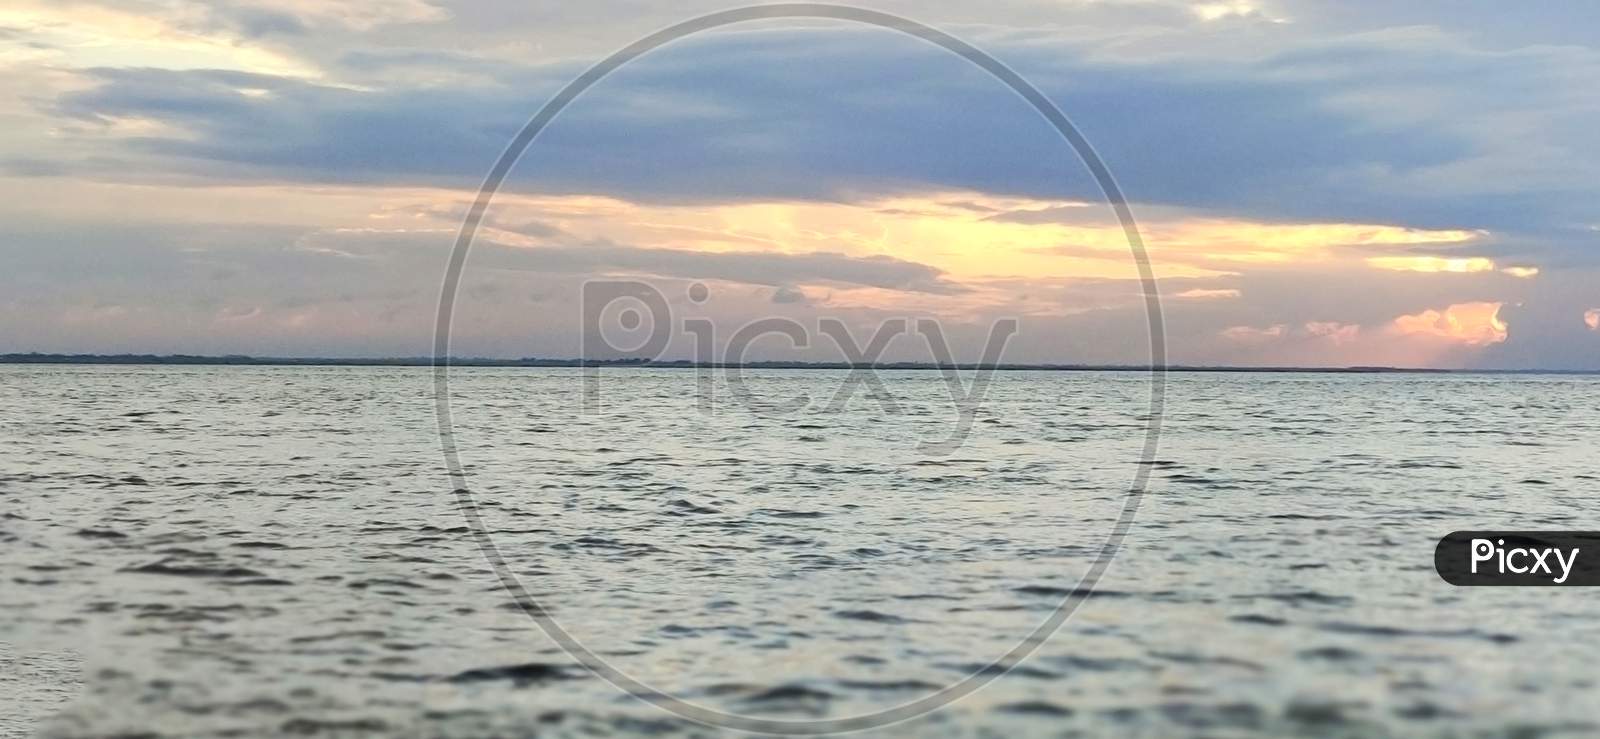 Background Of Colorful Sky On Water Concept: Dramatic Sunset With Twilight Color Sky And Clouds